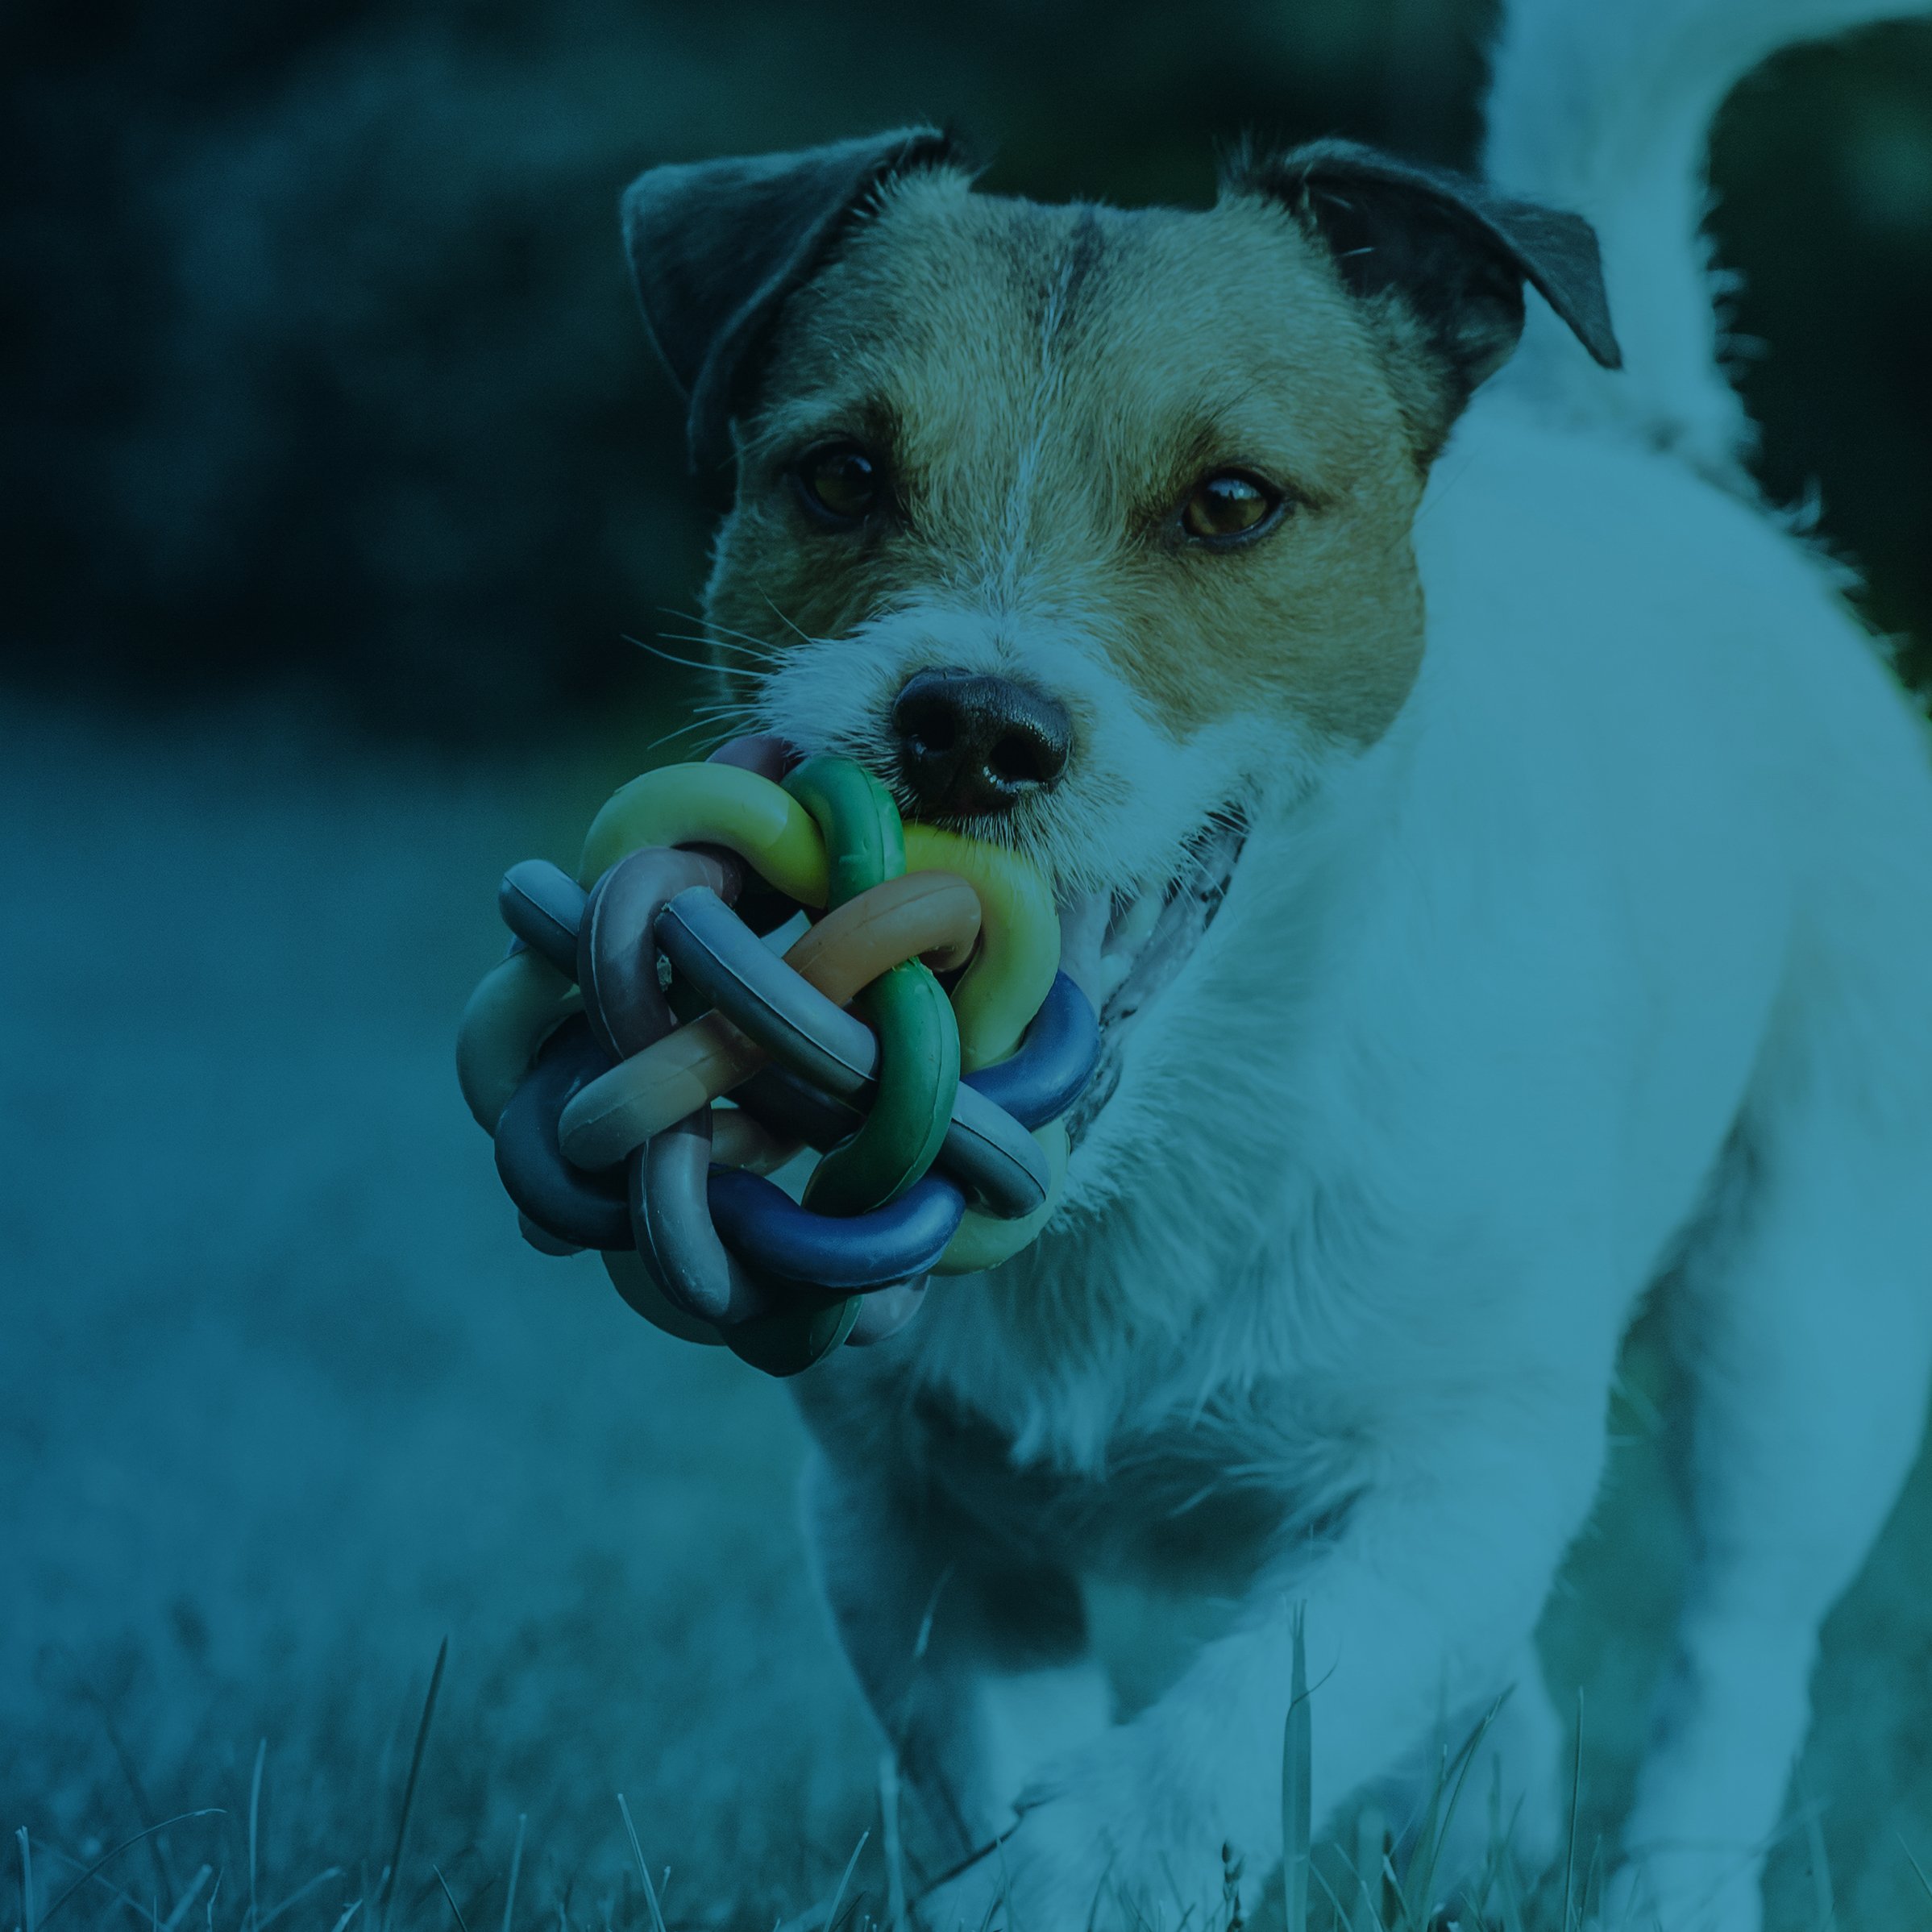 pet supplies company increases ecommerce sales and foot traffic